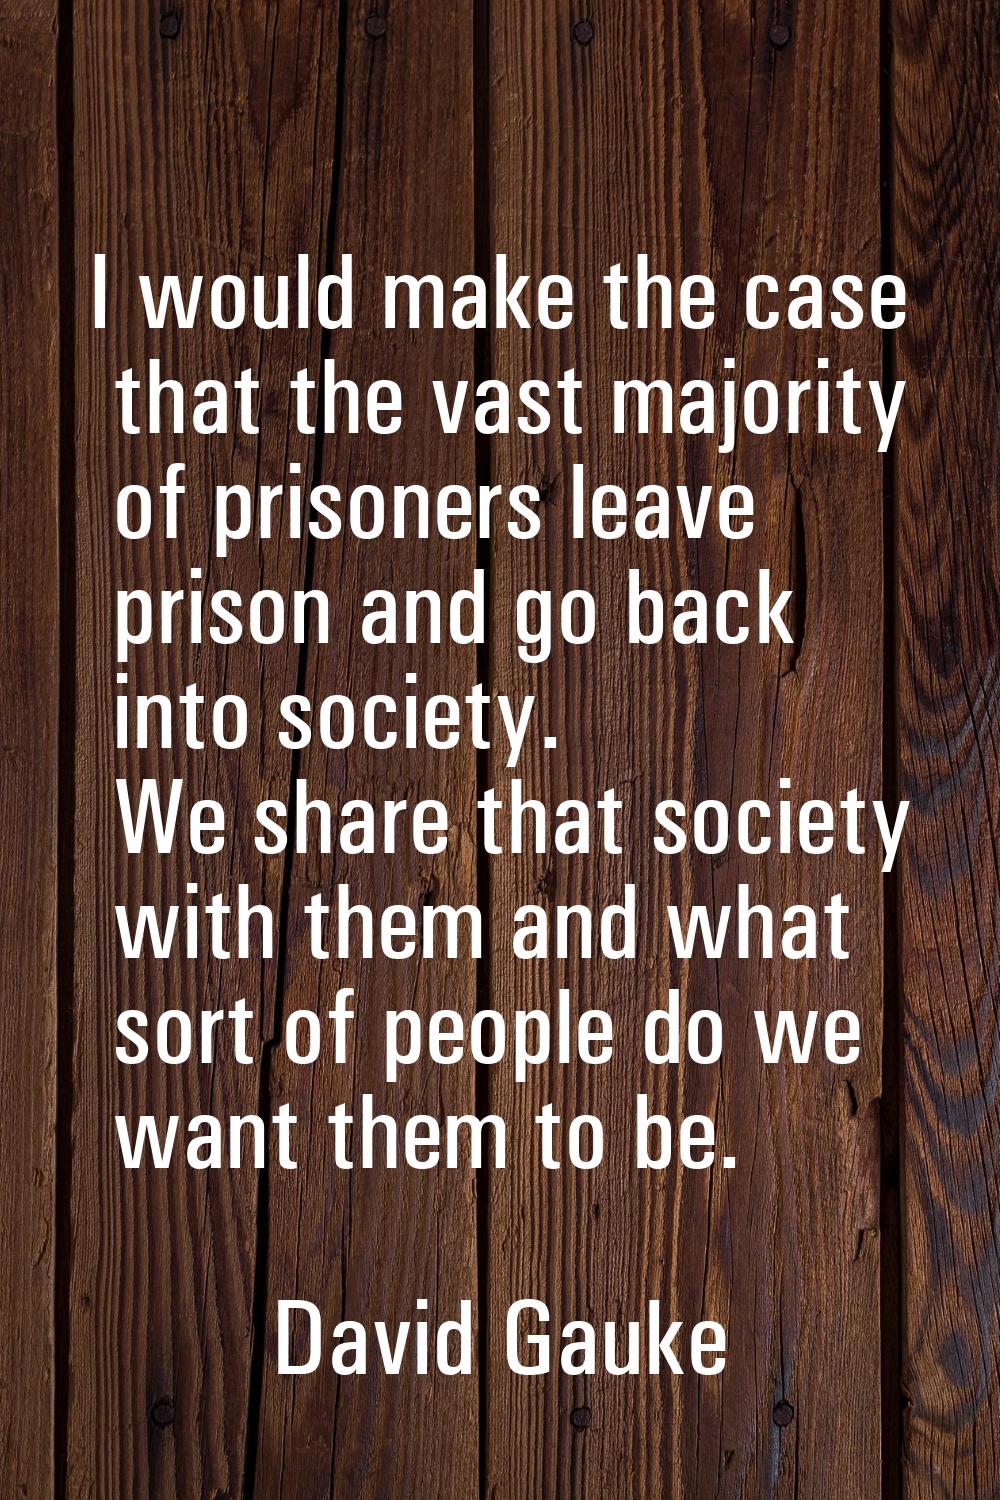 I would make the case that the vast majority of prisoners leave prison and go back into society. We